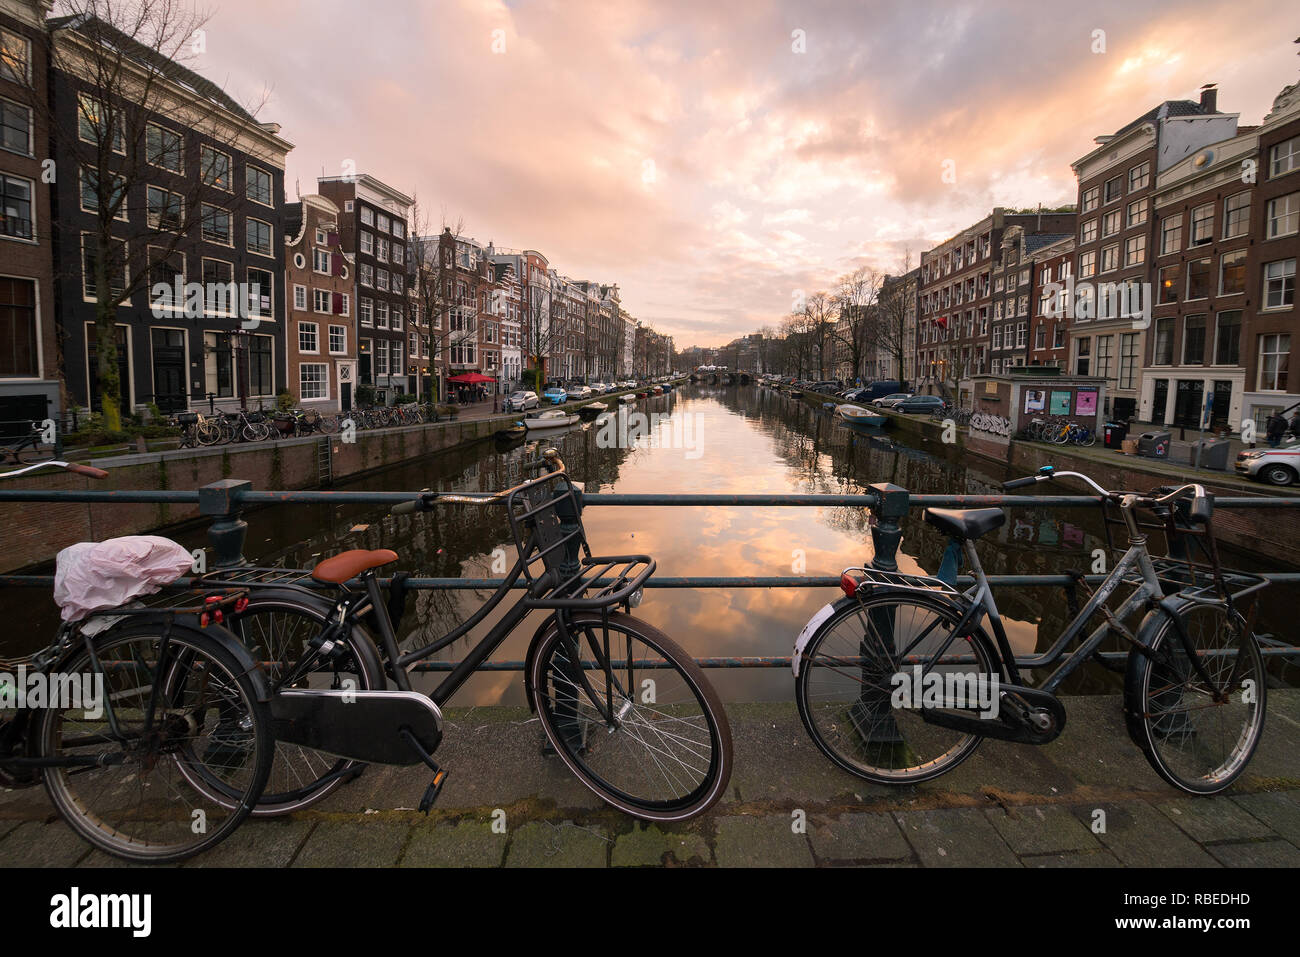 Bicycles locked to the bar of a bridge over a canal lined by traditional architecture houses at sunset in the center of Amsterdam, the Netherlands. Stock Photo